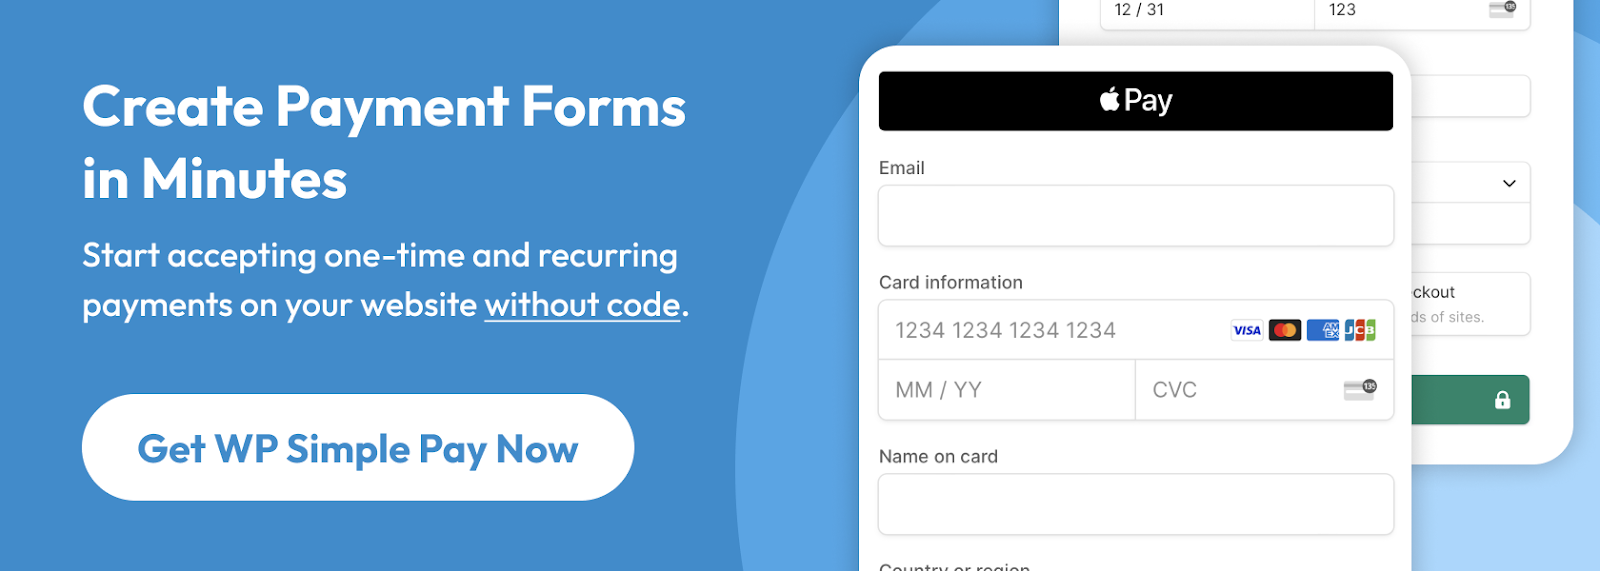 create payment forms in minute 